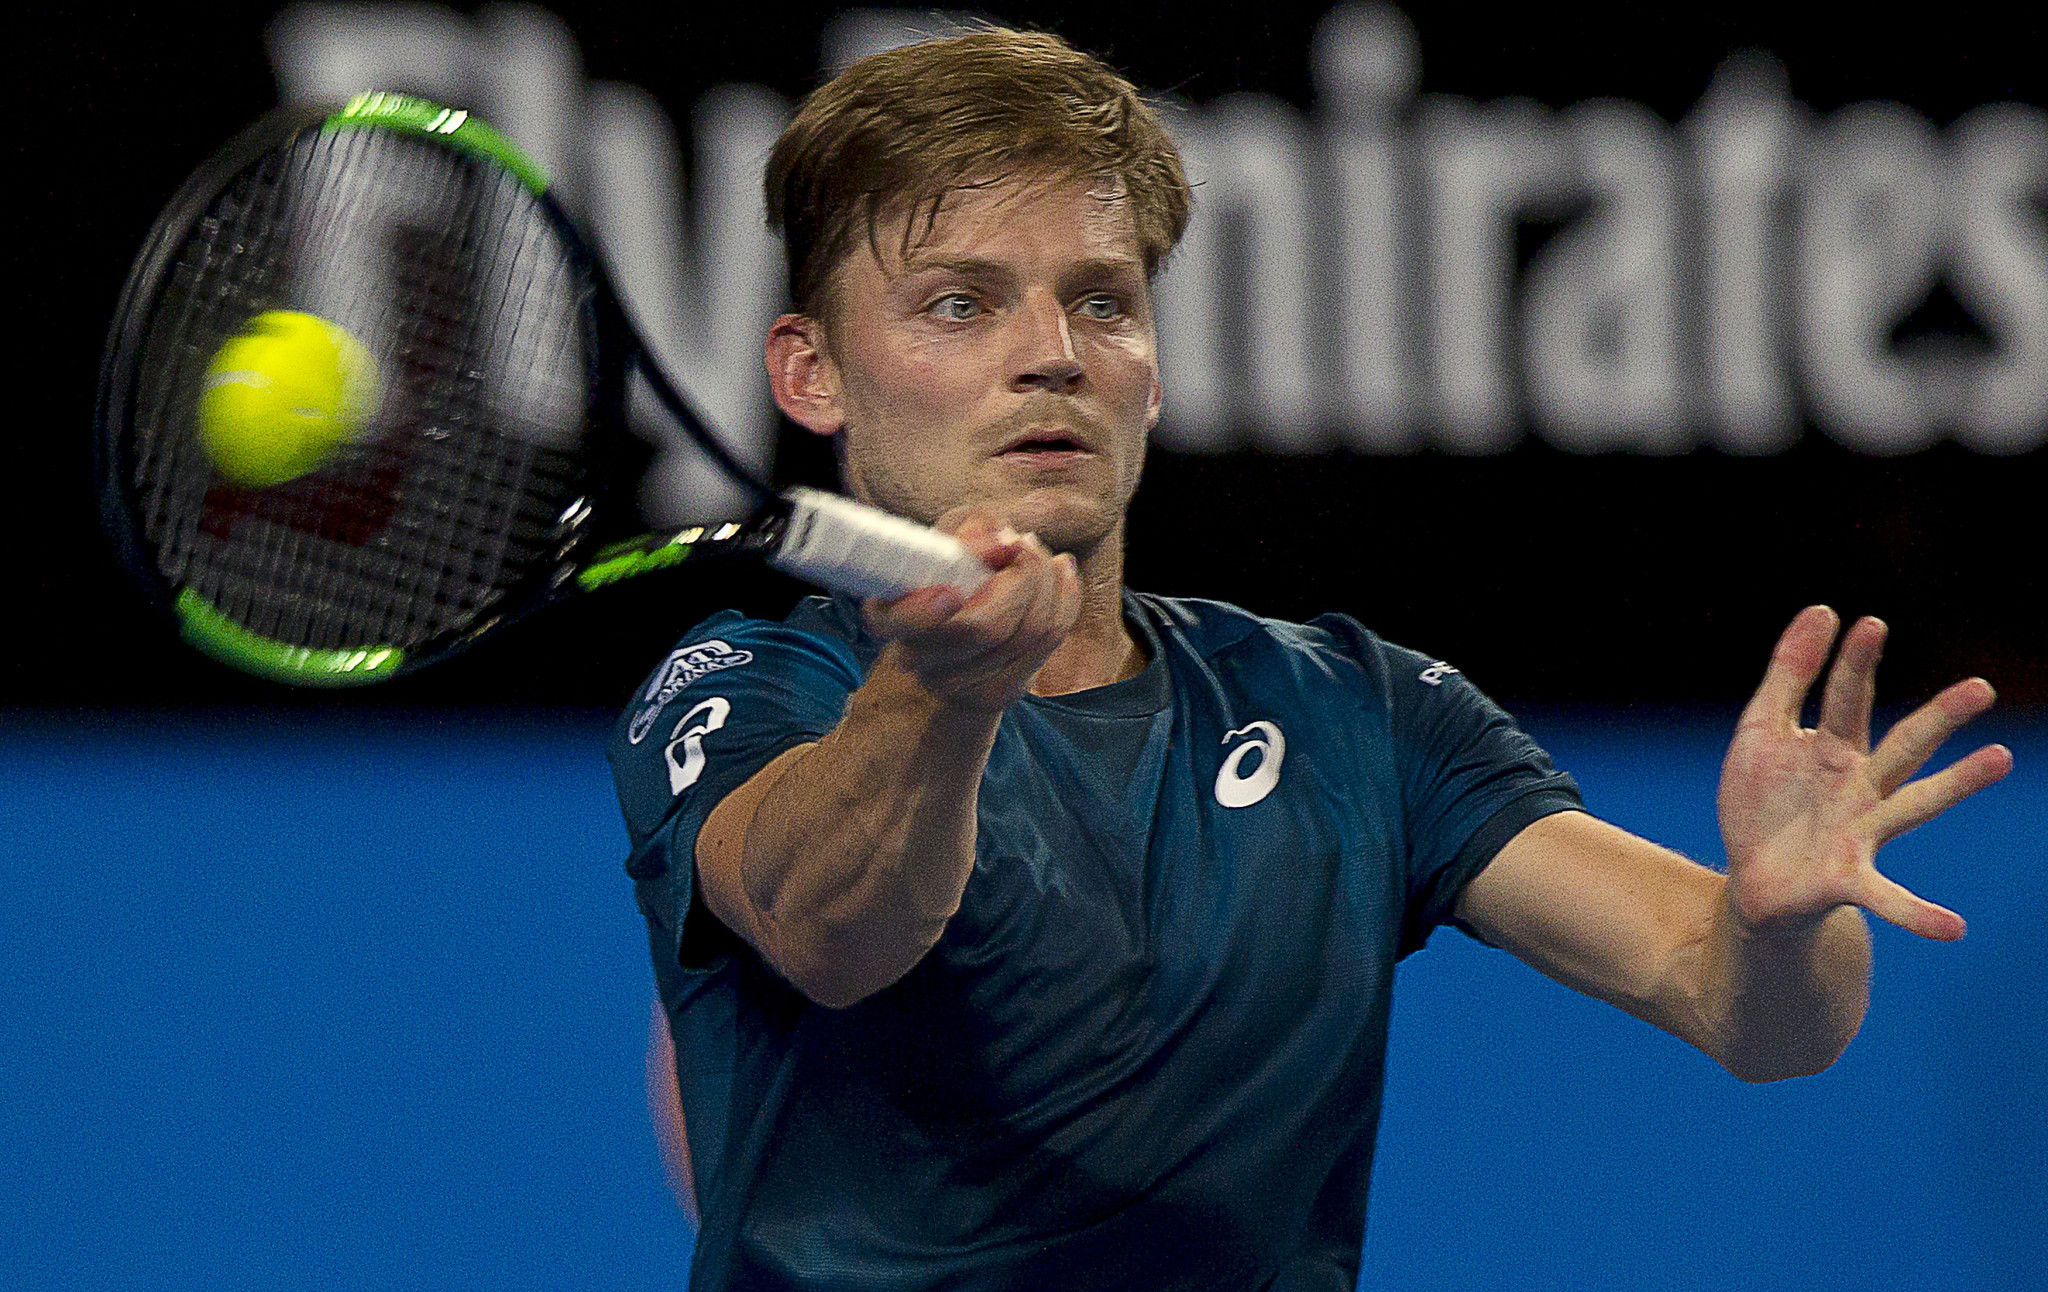 David Goffin beat Thanasi Kokkinakis in straight sets ©Getty Images